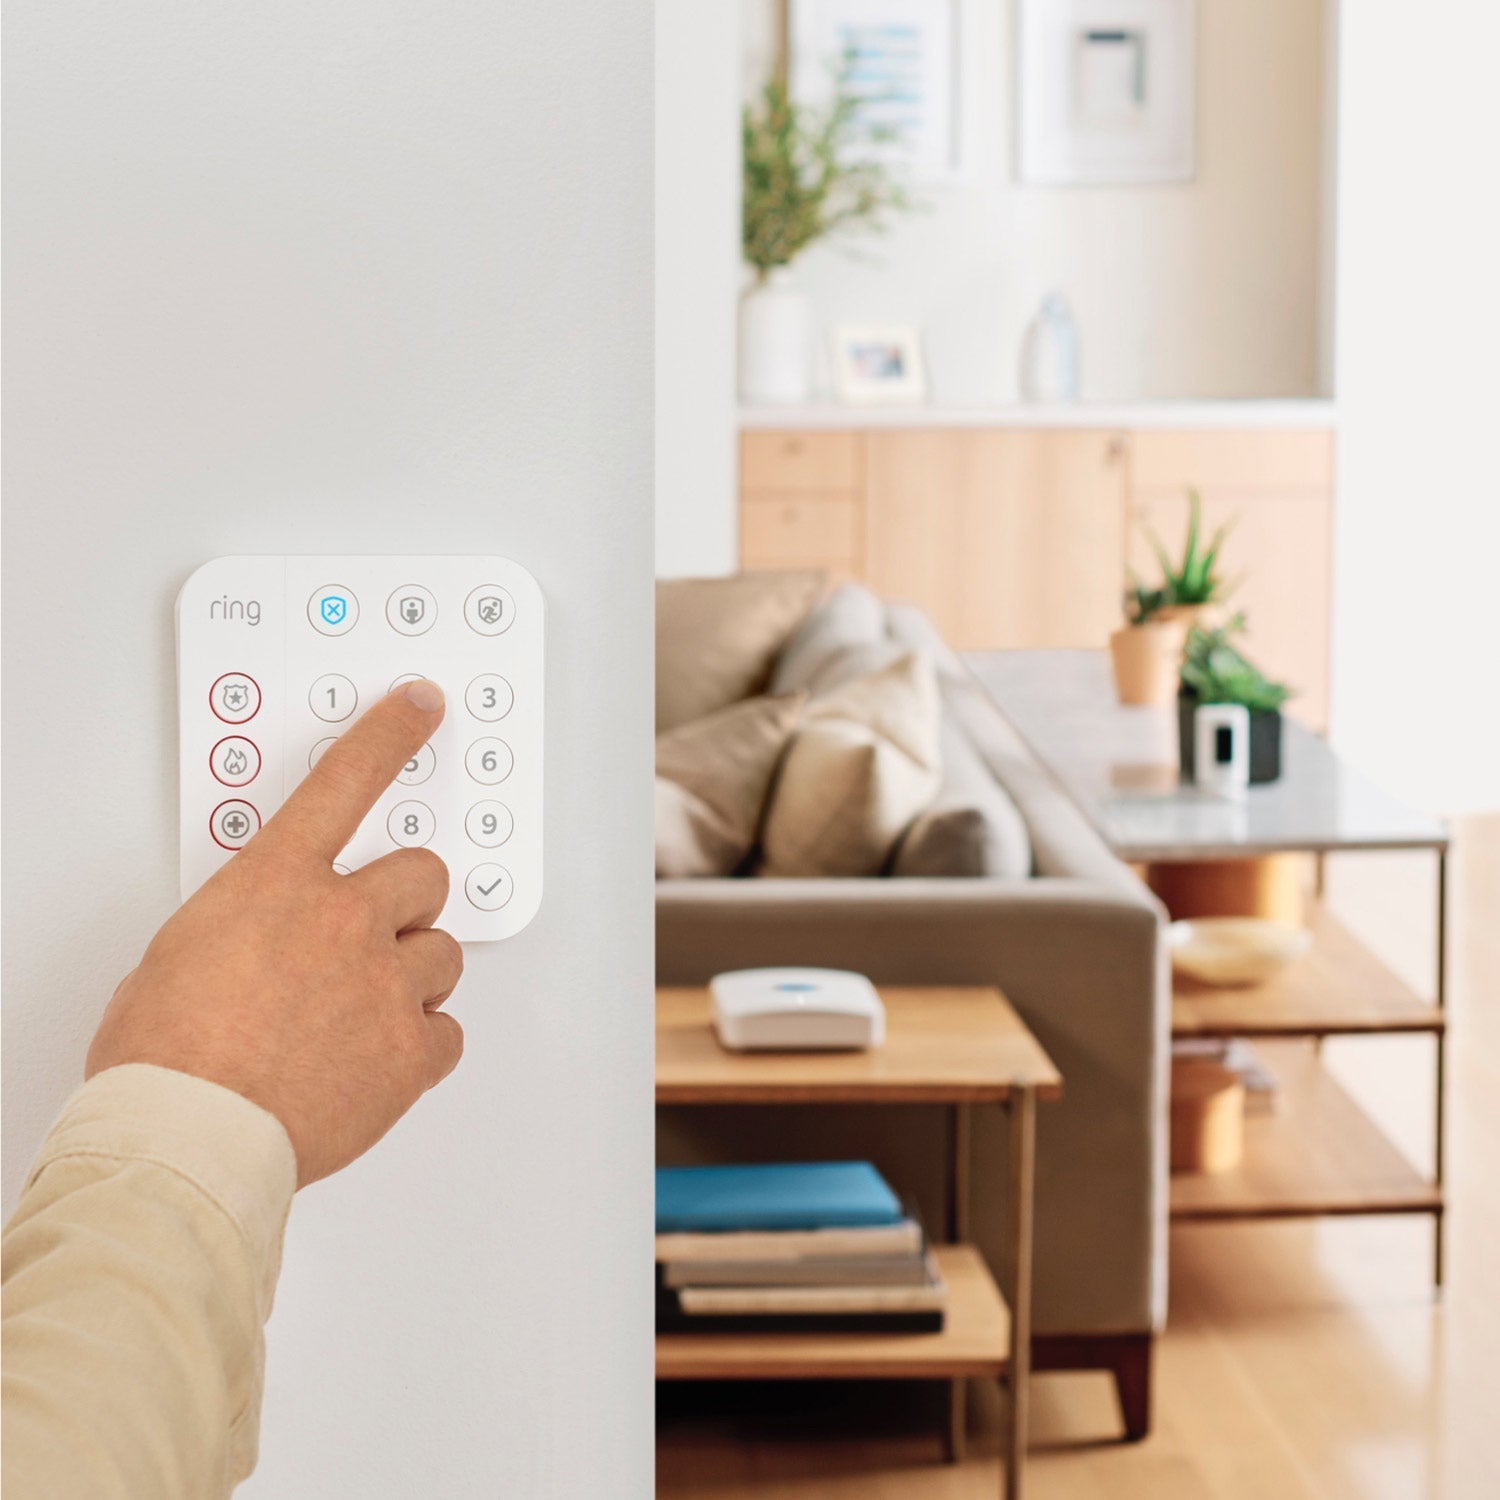 Alarm Pro, 13-Piece Kit (with built-in eero Wi-Fi 6 router and additional eero 6 Wi-Fi Router) - Inside a home, close-up of finger pressing button on keypad of 13-piece Alarm Pro Security Kit.